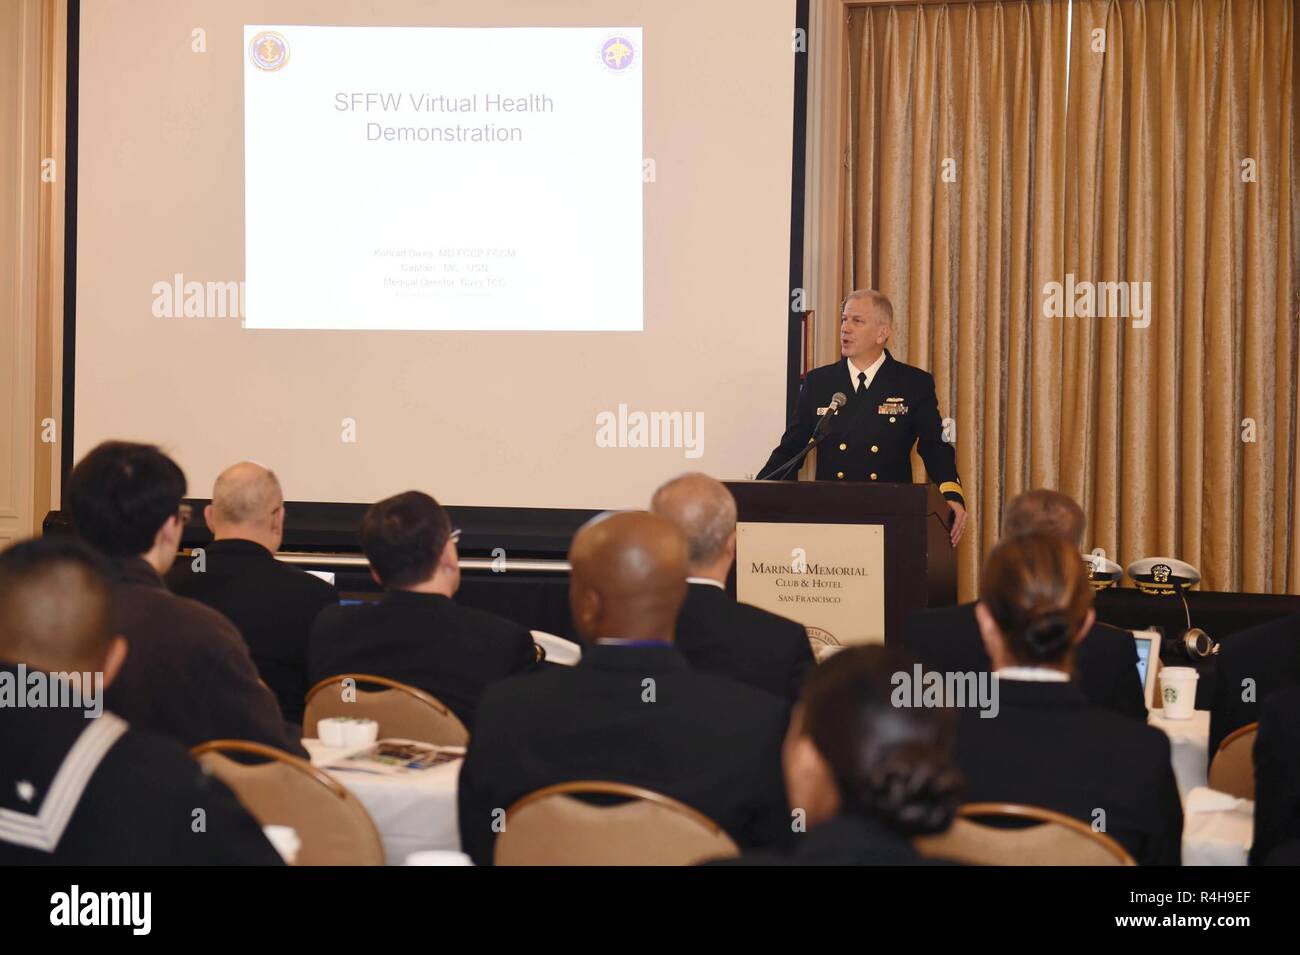 SAN FRANCISCO (Oct. 3, 2018) Rear Adm. Paul D. Pearigen, Commander, Navy Medicine West, addresses local emergency responders and medical professionals prior to begining a tele-medicinal training exercise held at the Marines' Memorial Club during San Francisco Fleet Week (SFFW) 2018. SFFW is an opportunity for the American public to meet their Navy, Marine Corps and Coast Guard teams and experience America's sea services. During fleet week, service members participate in various community service events, showcase capabilities and equipment to the community, and enjoy the hospitality of San Fran Stock Photo